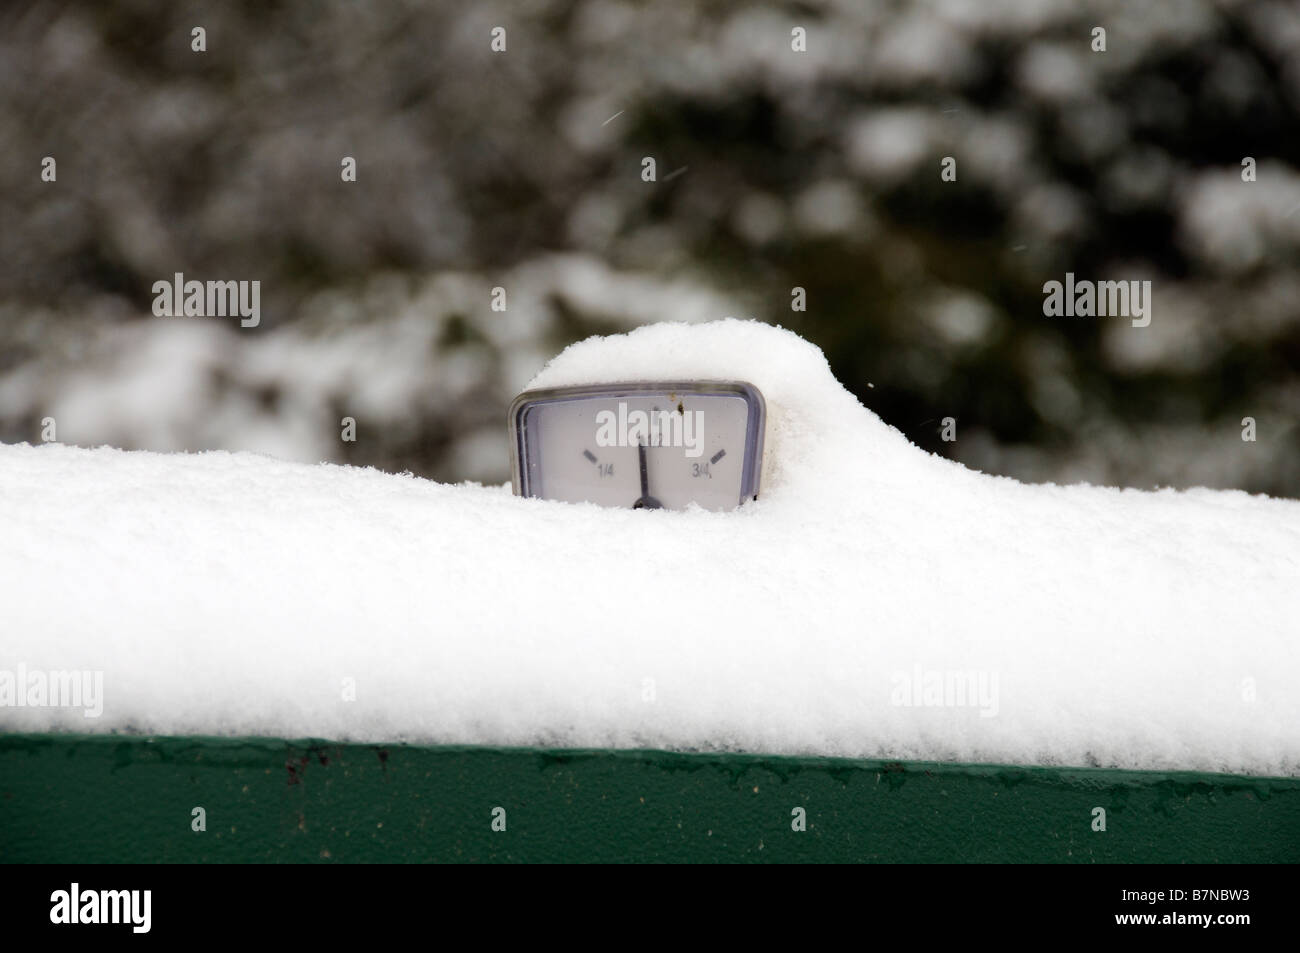 Oil fuel guage on top of a heating oil tank covered in snow England UK Stock Photo